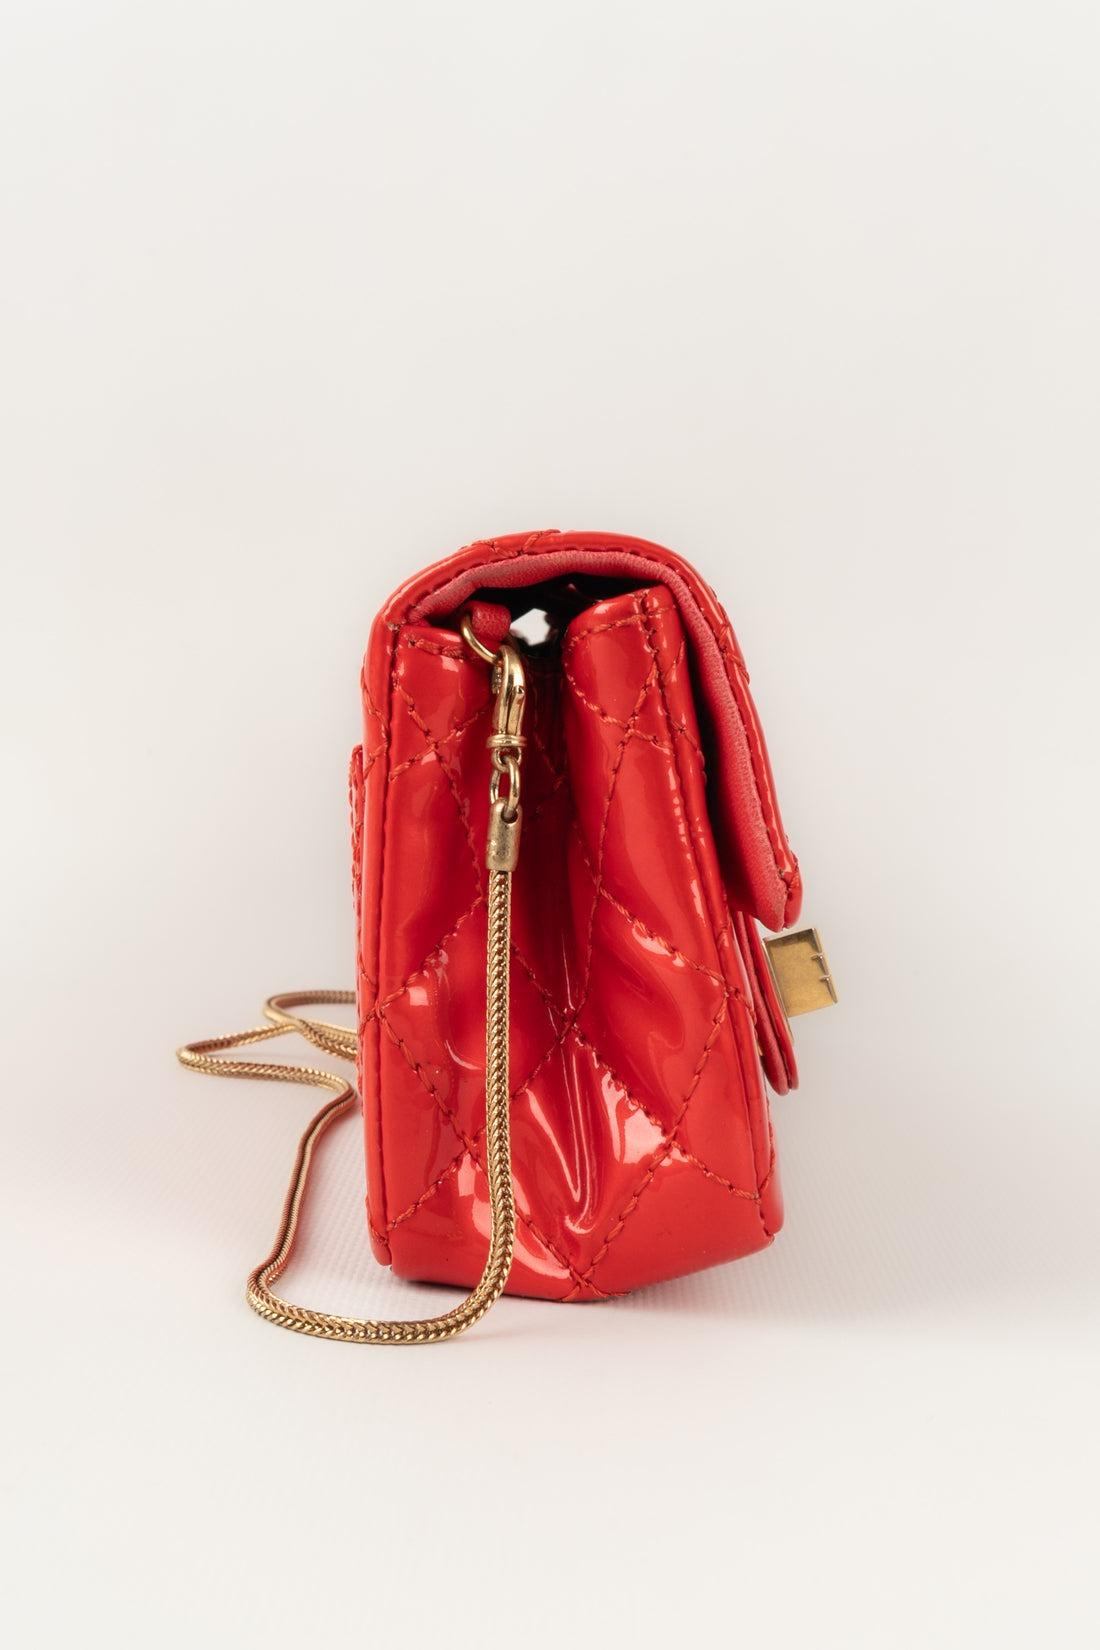 Chanel Baguette Bag with Double Pocket In Red Patent Leather, 2008/2009 For Sale 2